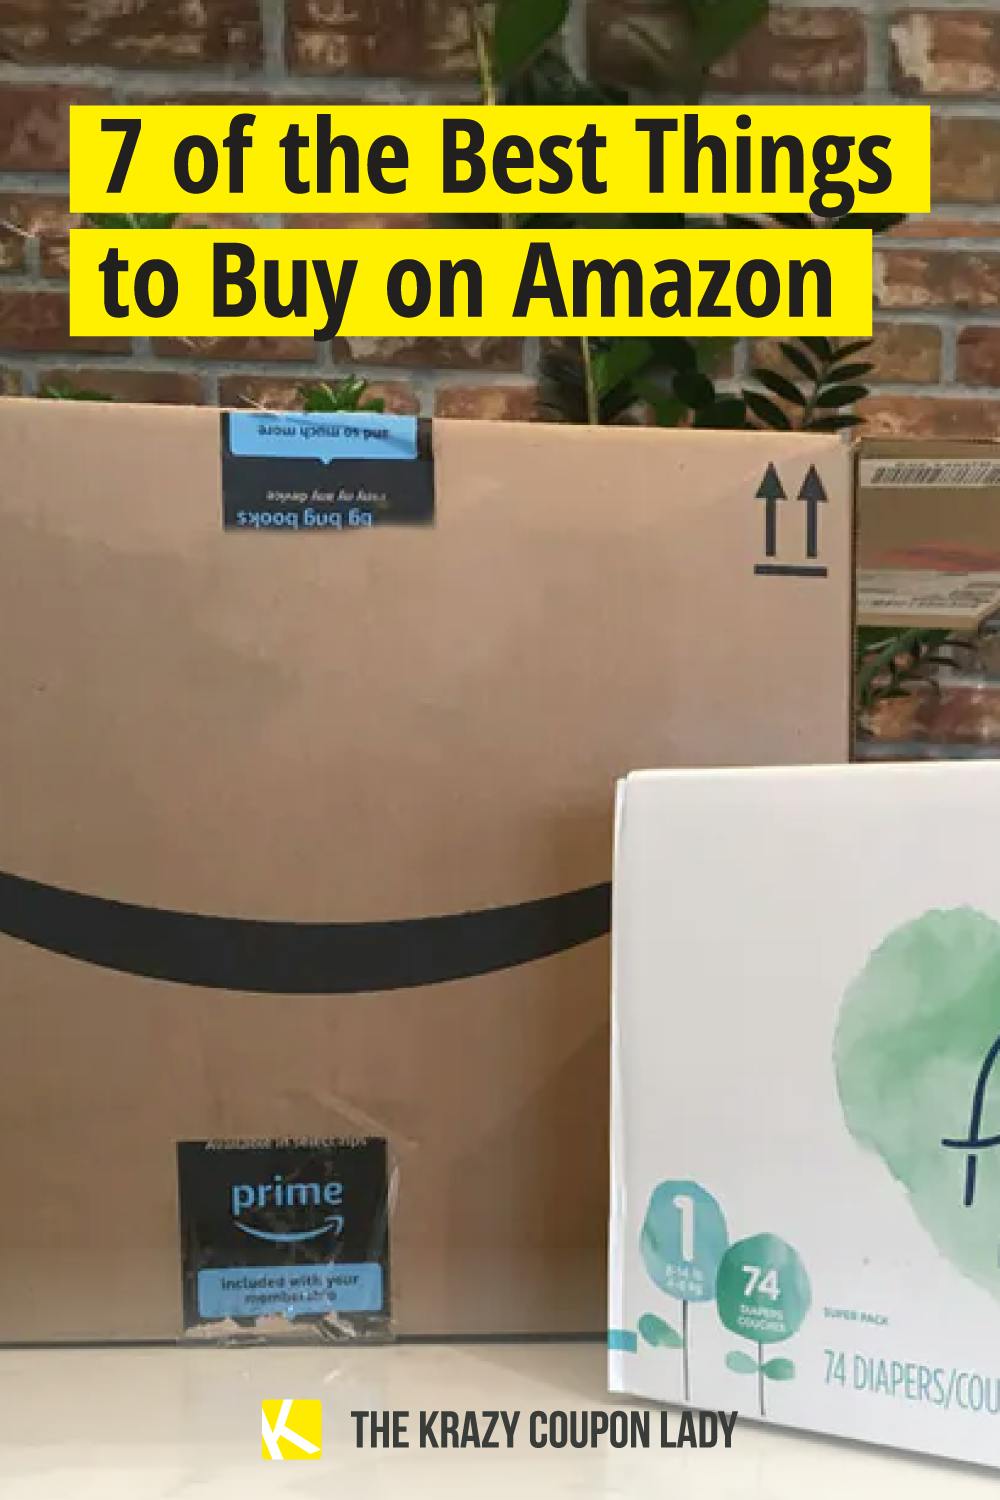 7 of the Best Things to Buy on Amazon